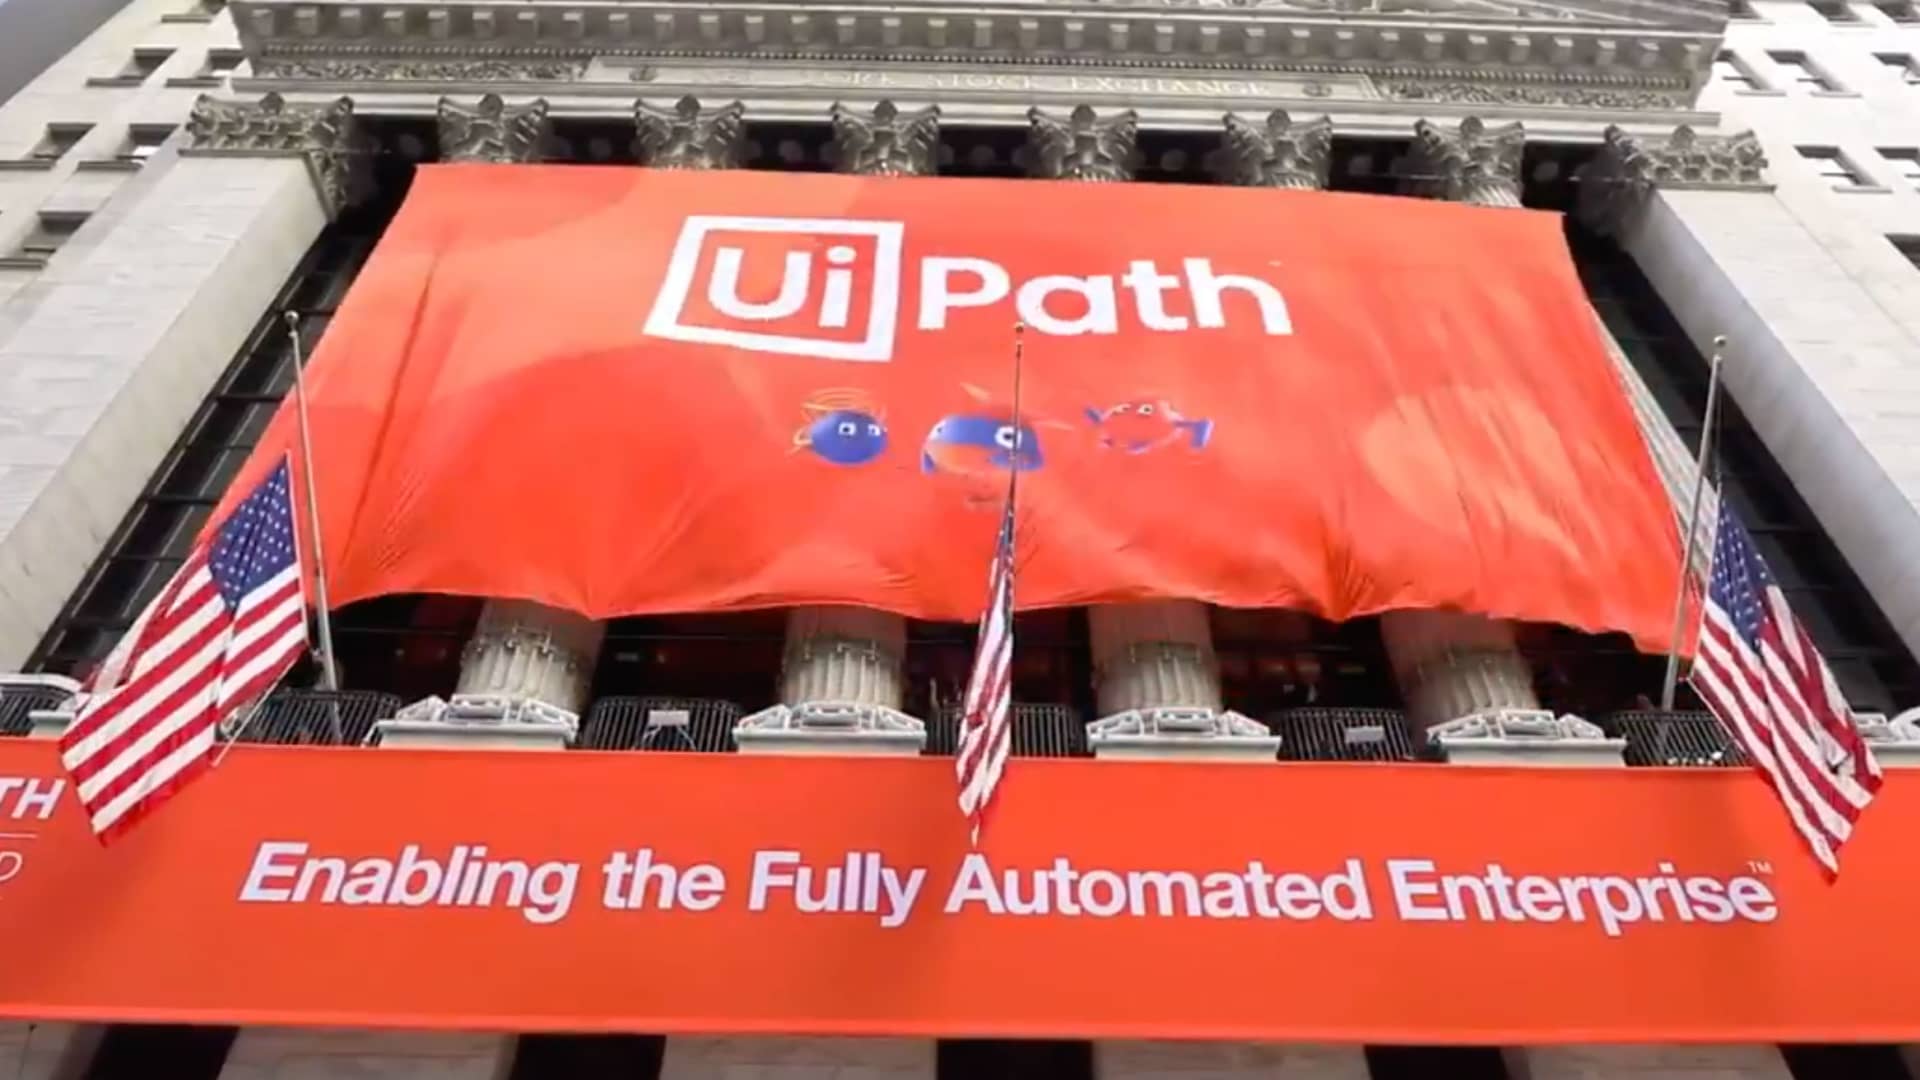 UiPath to cut 5% of its workforce as part of restructuring plan